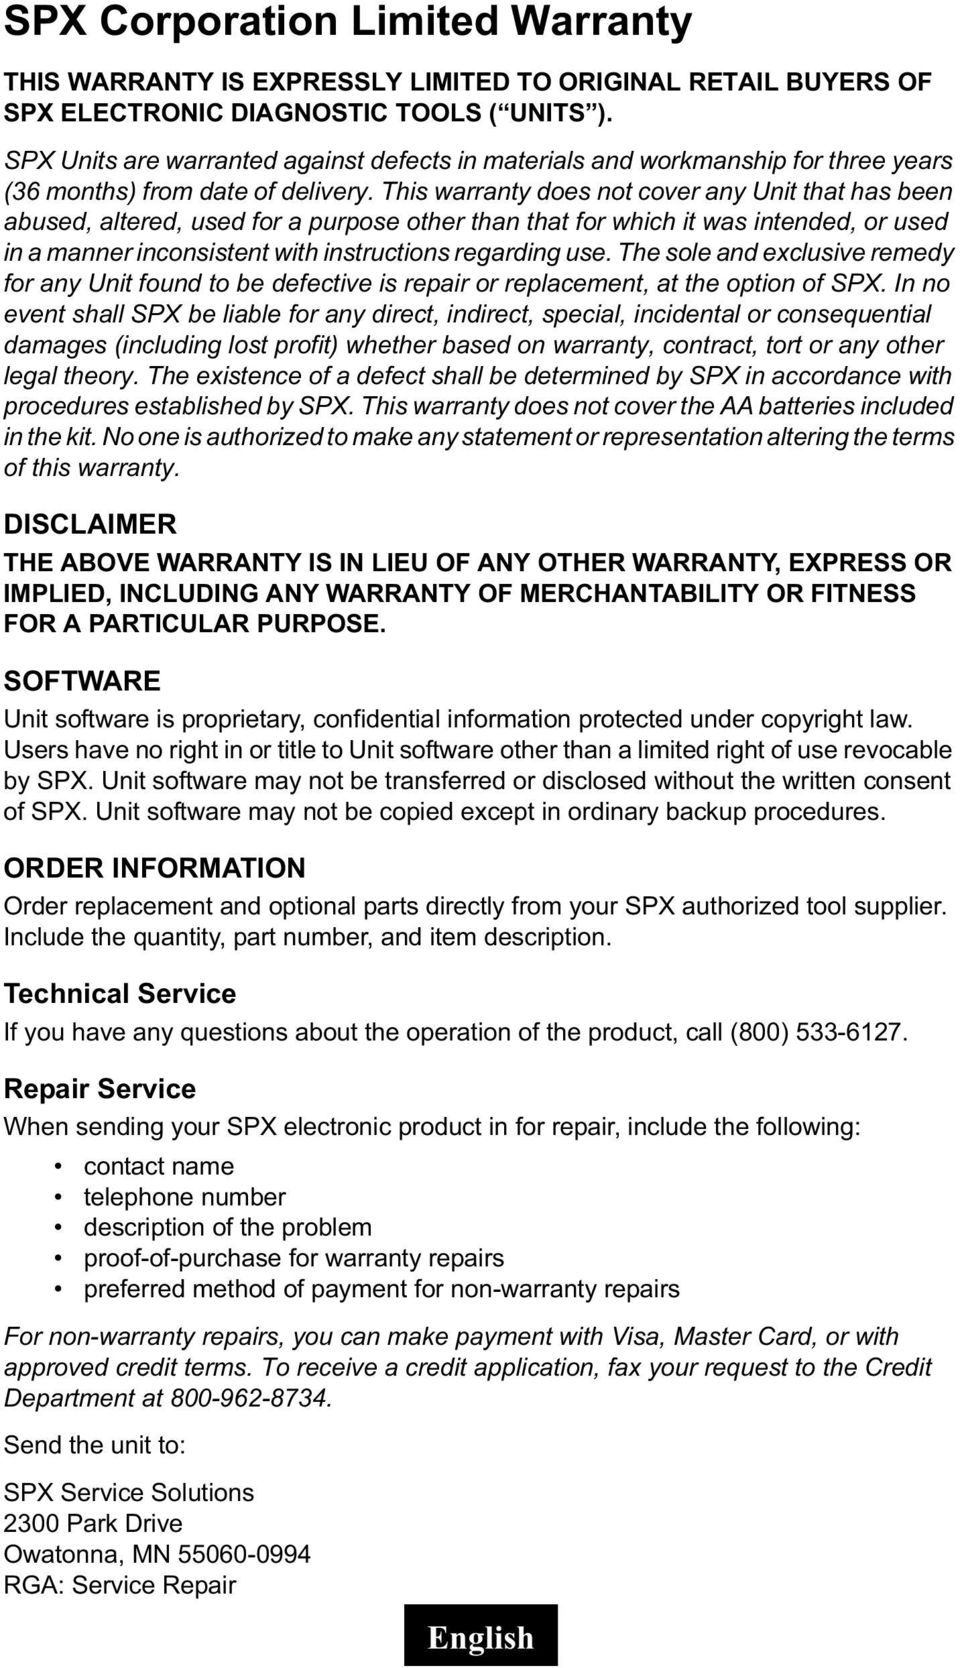 This warranty does not cover any Unit that has been abused, altered, used for a purpose other than that for which it was intended, or used in a manner inconsistent with instructions regarding use.